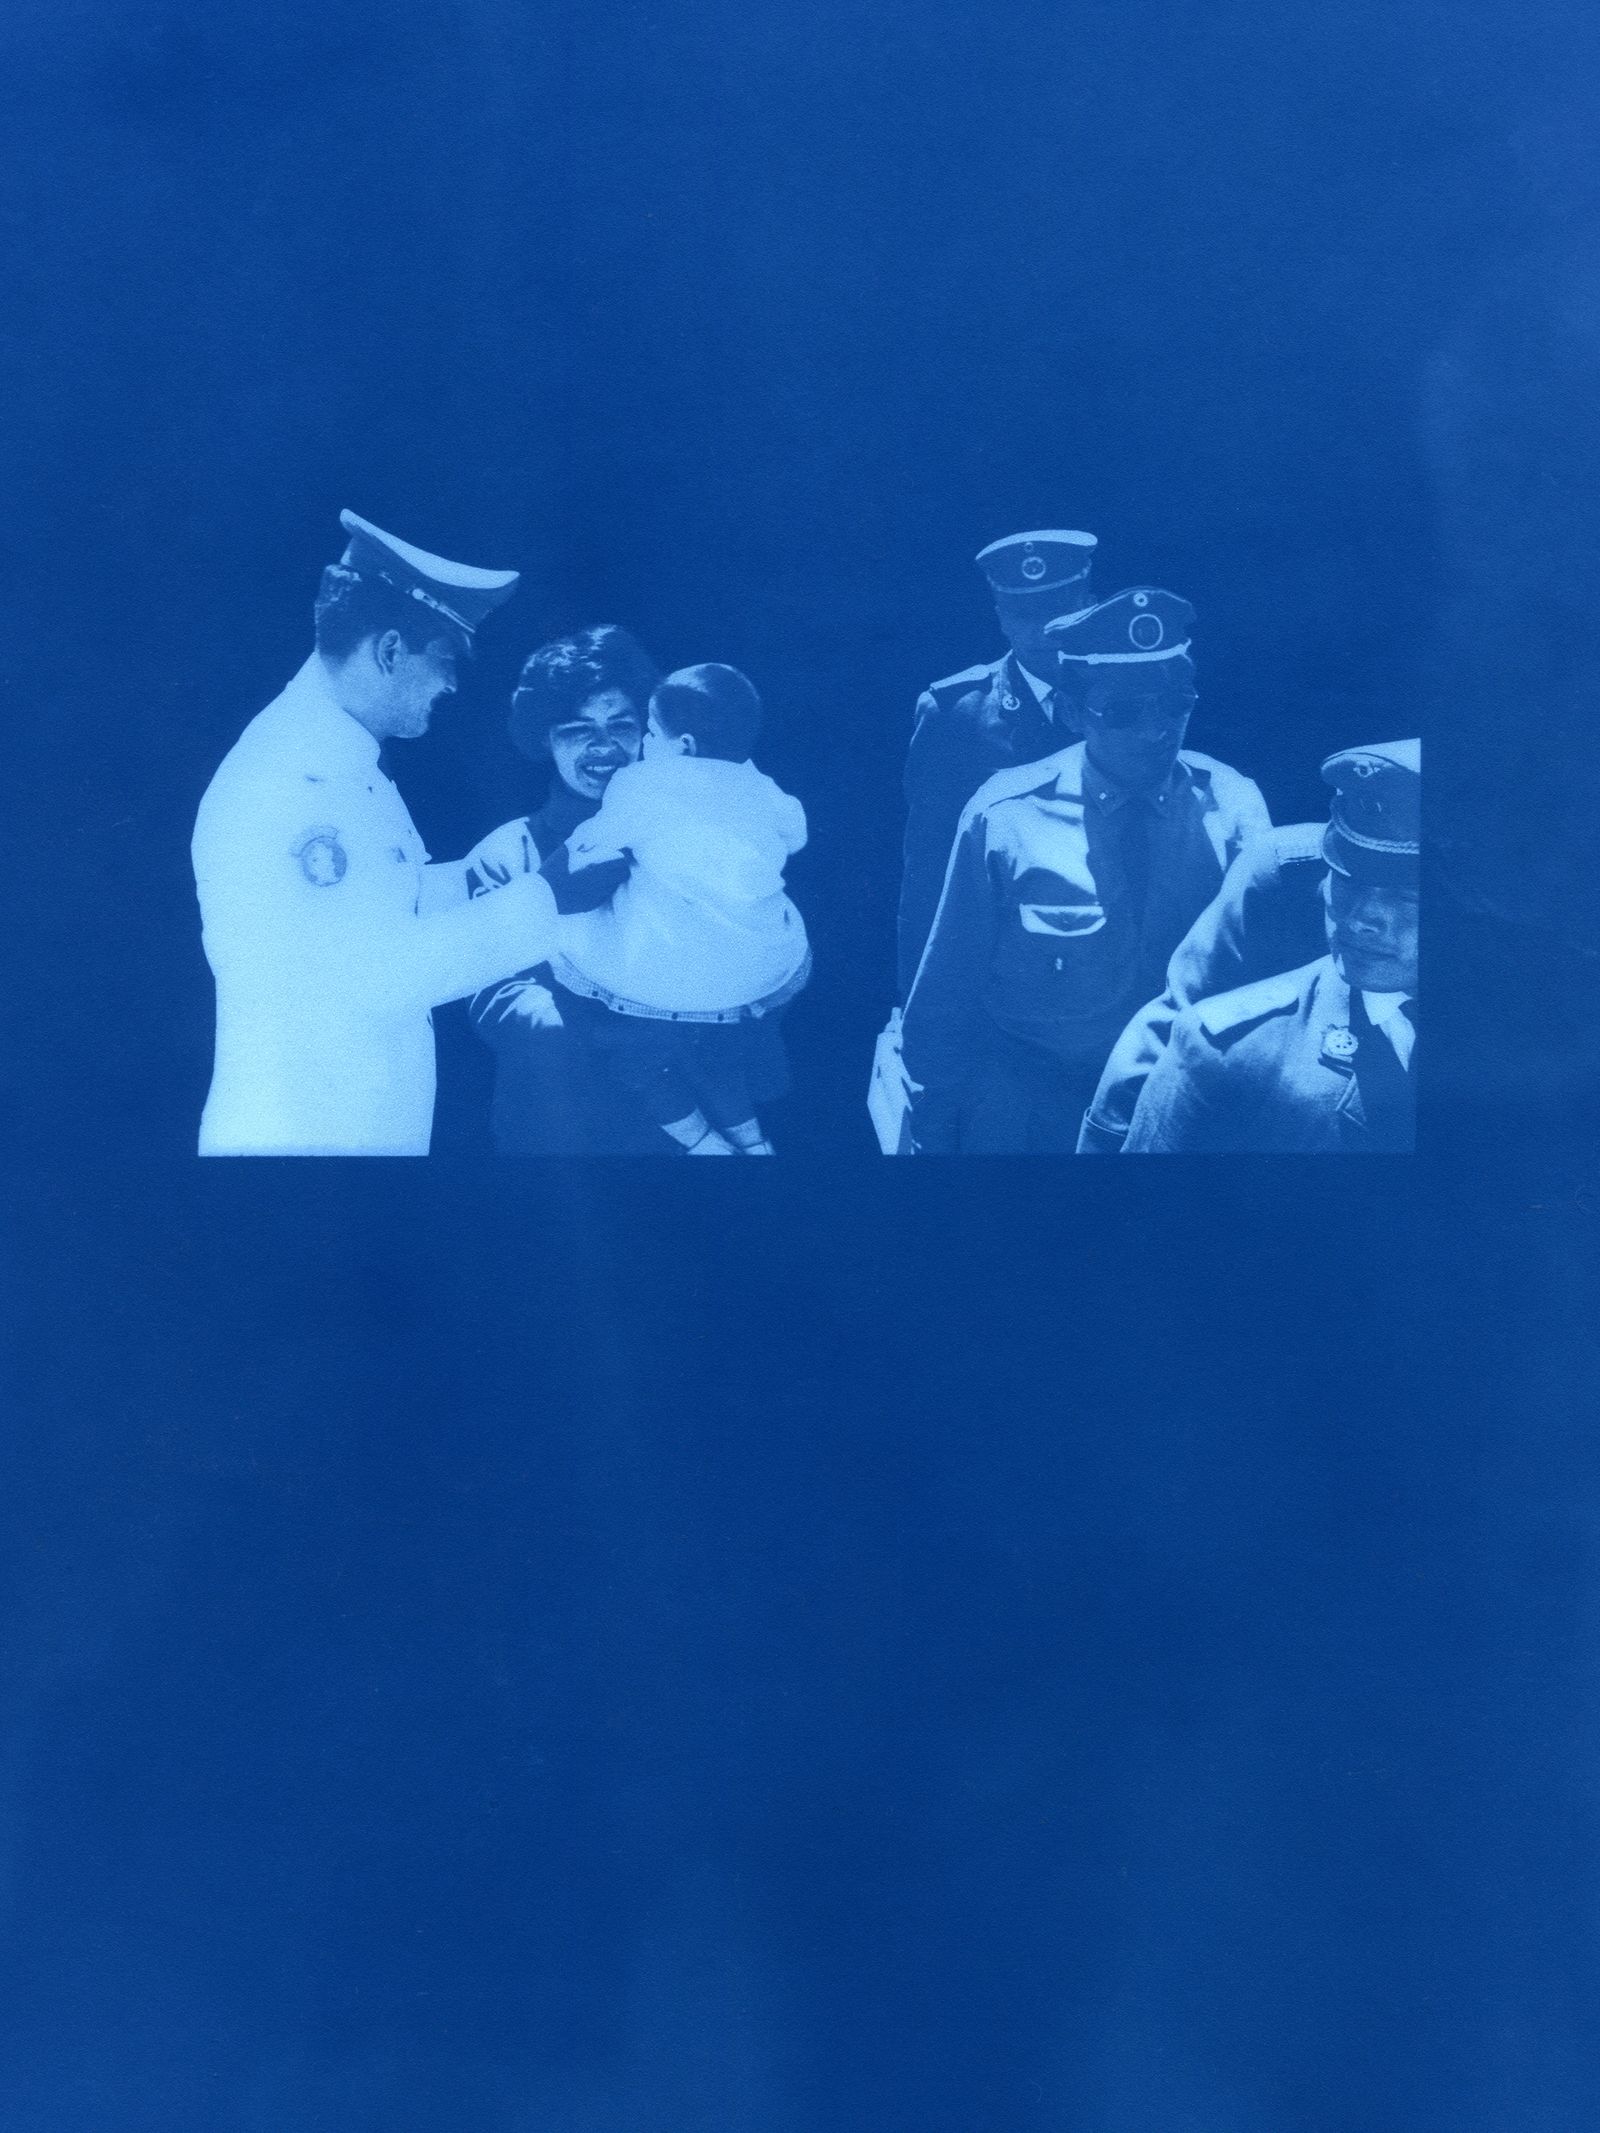 © Daniel Mebarek - BOLIVIA. La Paz. 1964. My grandmother holds my mother, Varinia, as police officers exit from a bus. Cyanotype on mat paper.